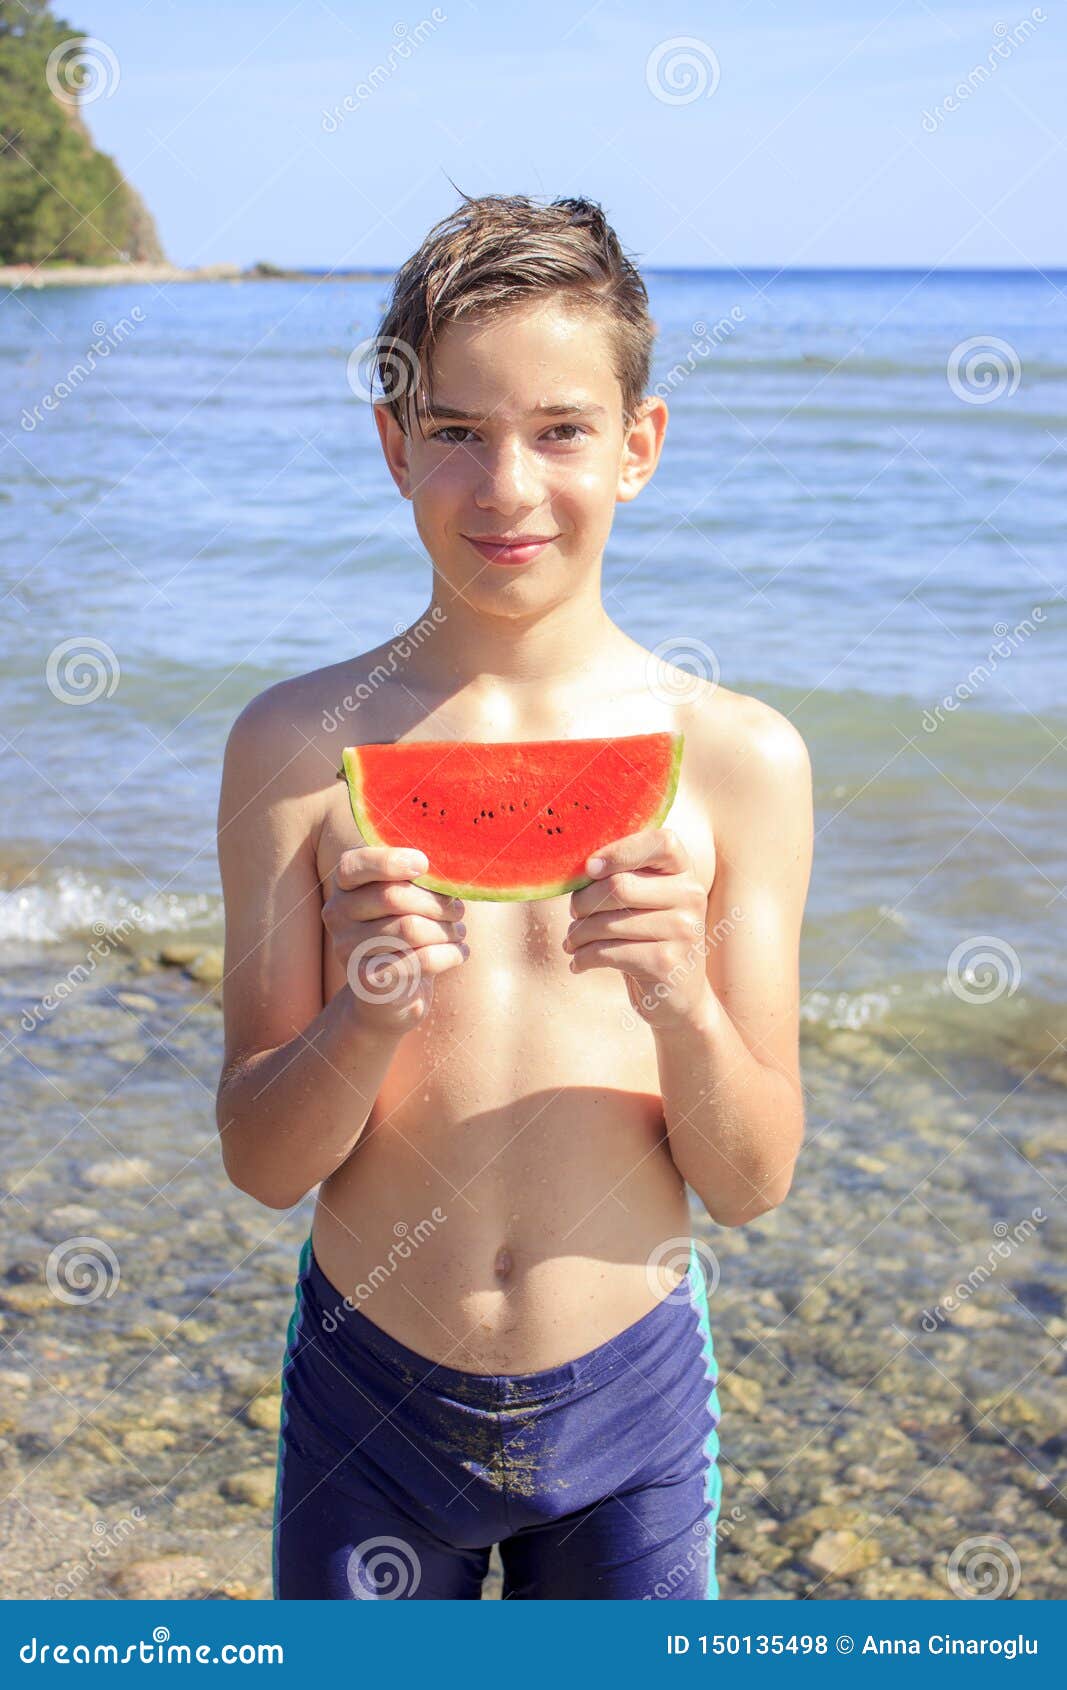 cute teenager boy holds a slice of watermelon on the beach by the sea